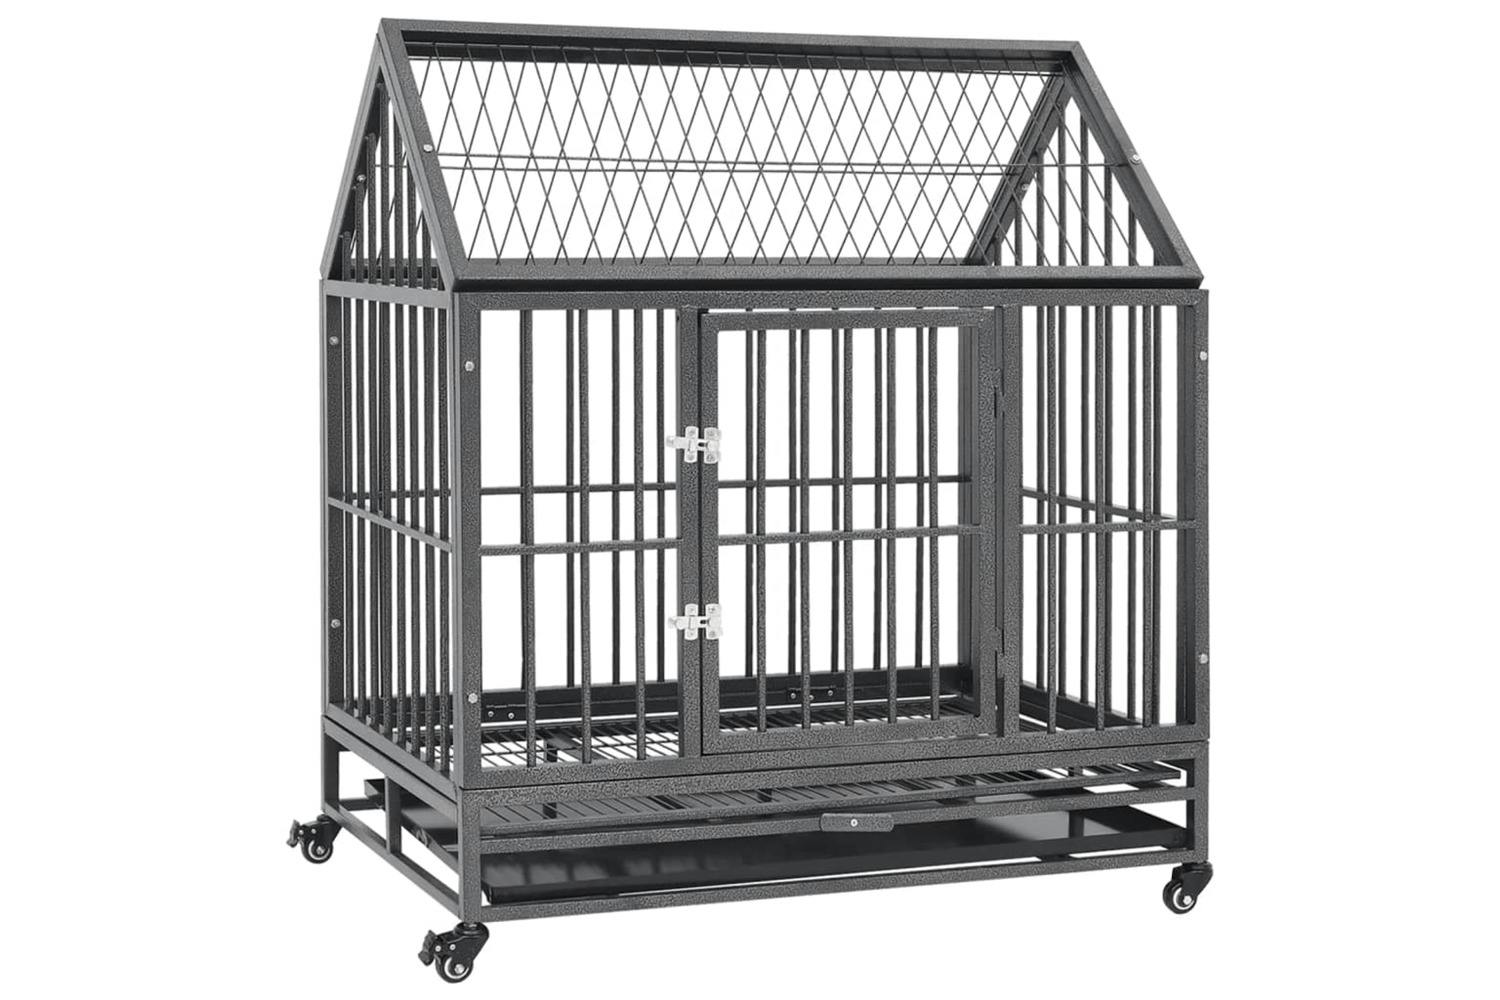 Vidaxl 171493 Dog Cage With Wheels And Roof Steel 92x62x106 Cm